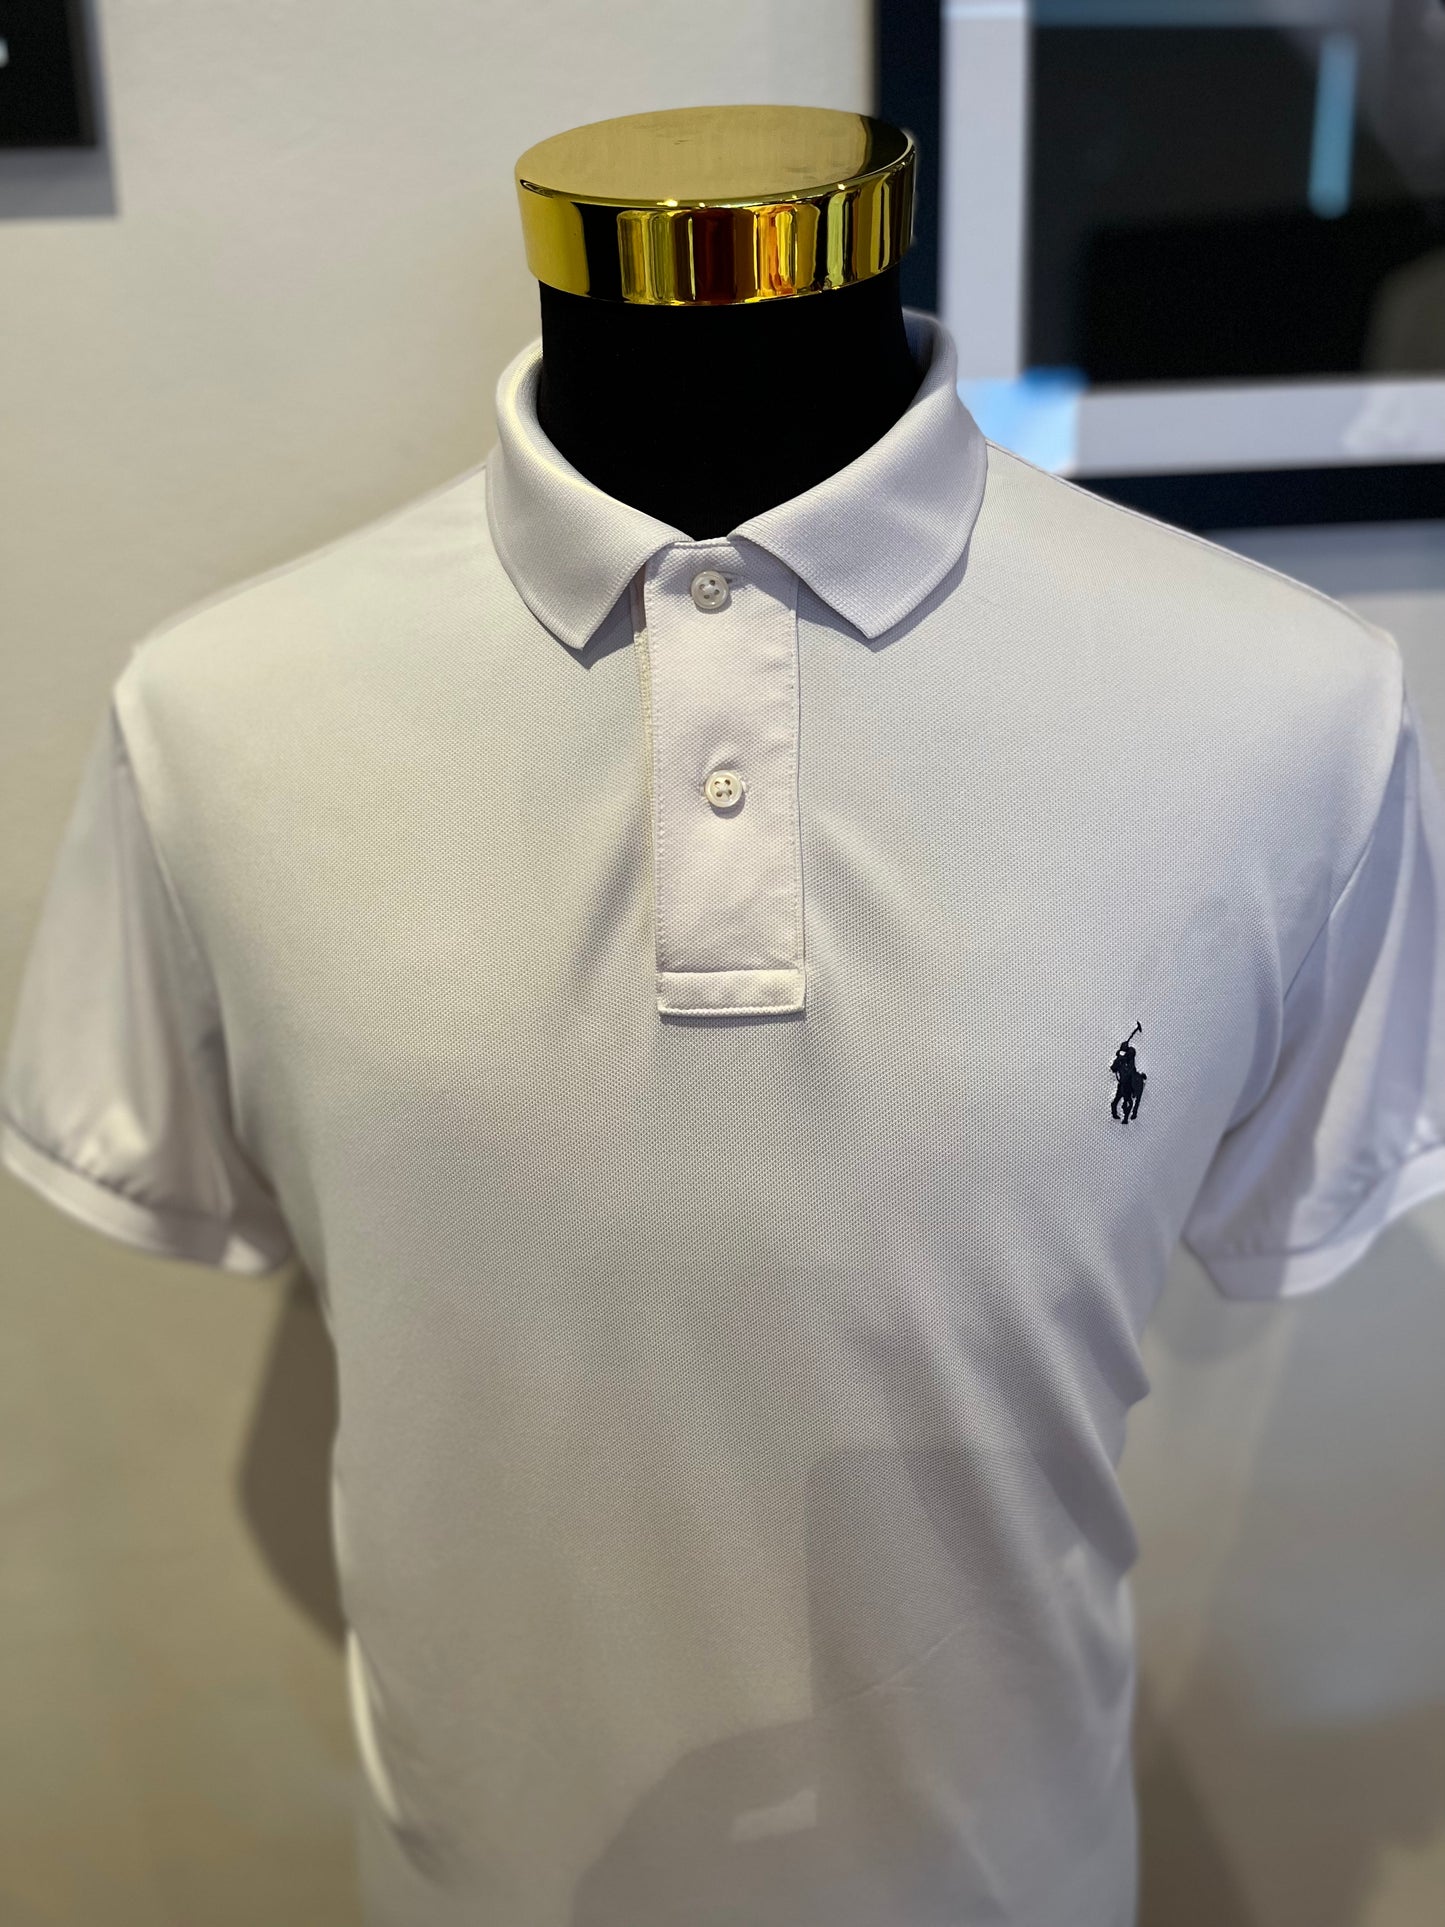 Ralph Lauren Performance Polyester Blend White Polo Shirt Classic Fit